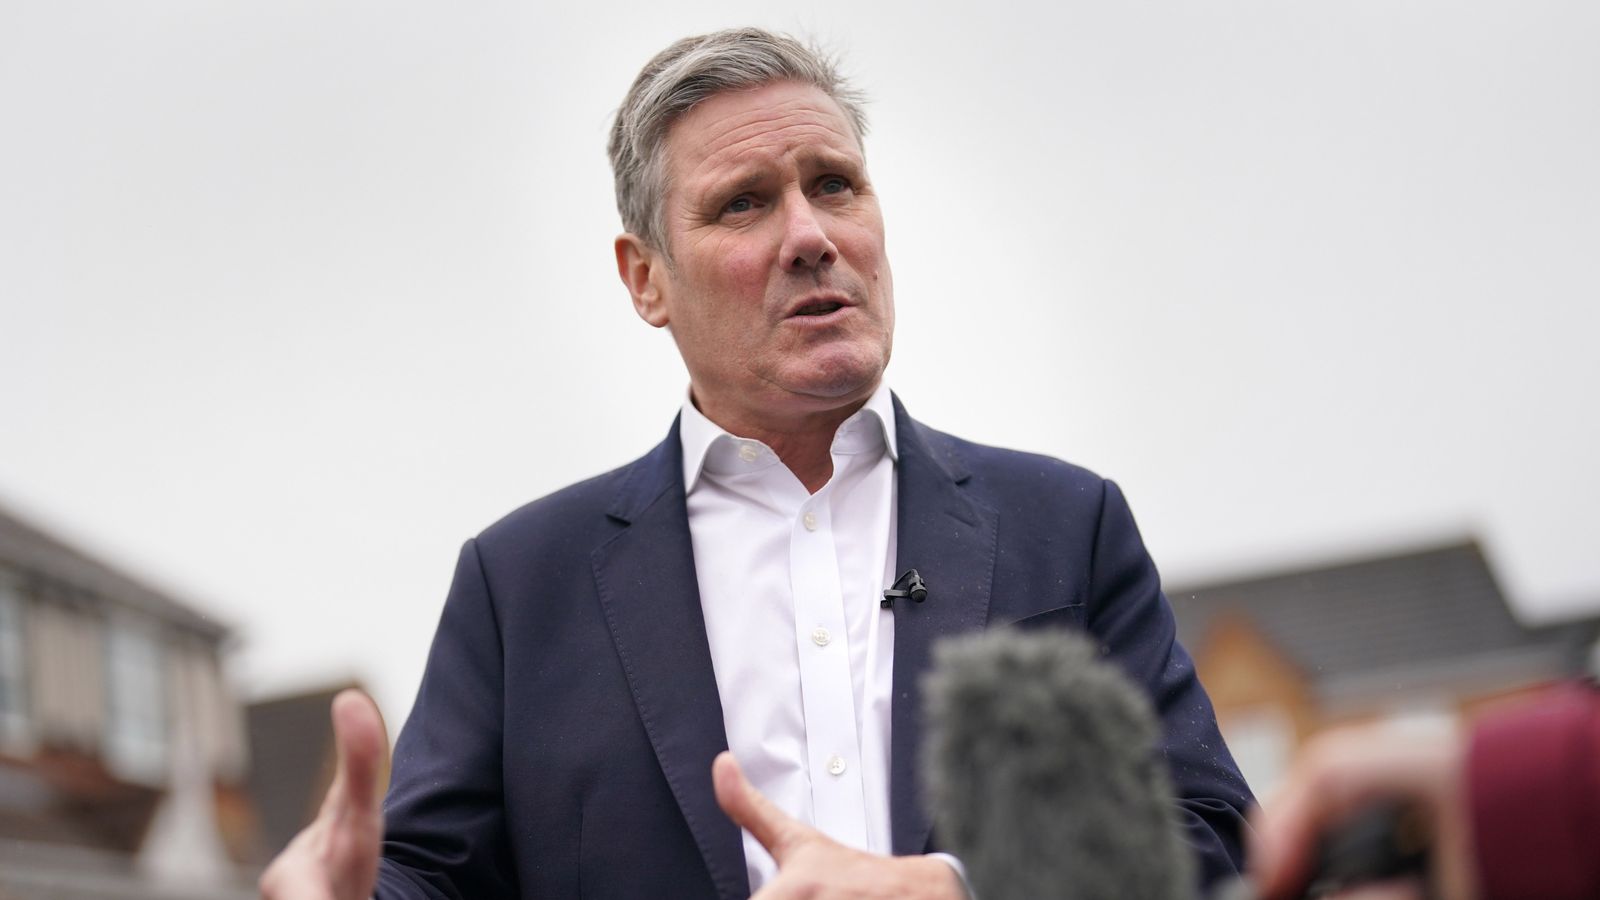 Sir Keir Starmer says questions about his CPS role during Andrew Malkinson case should be 'directed elsewhere'